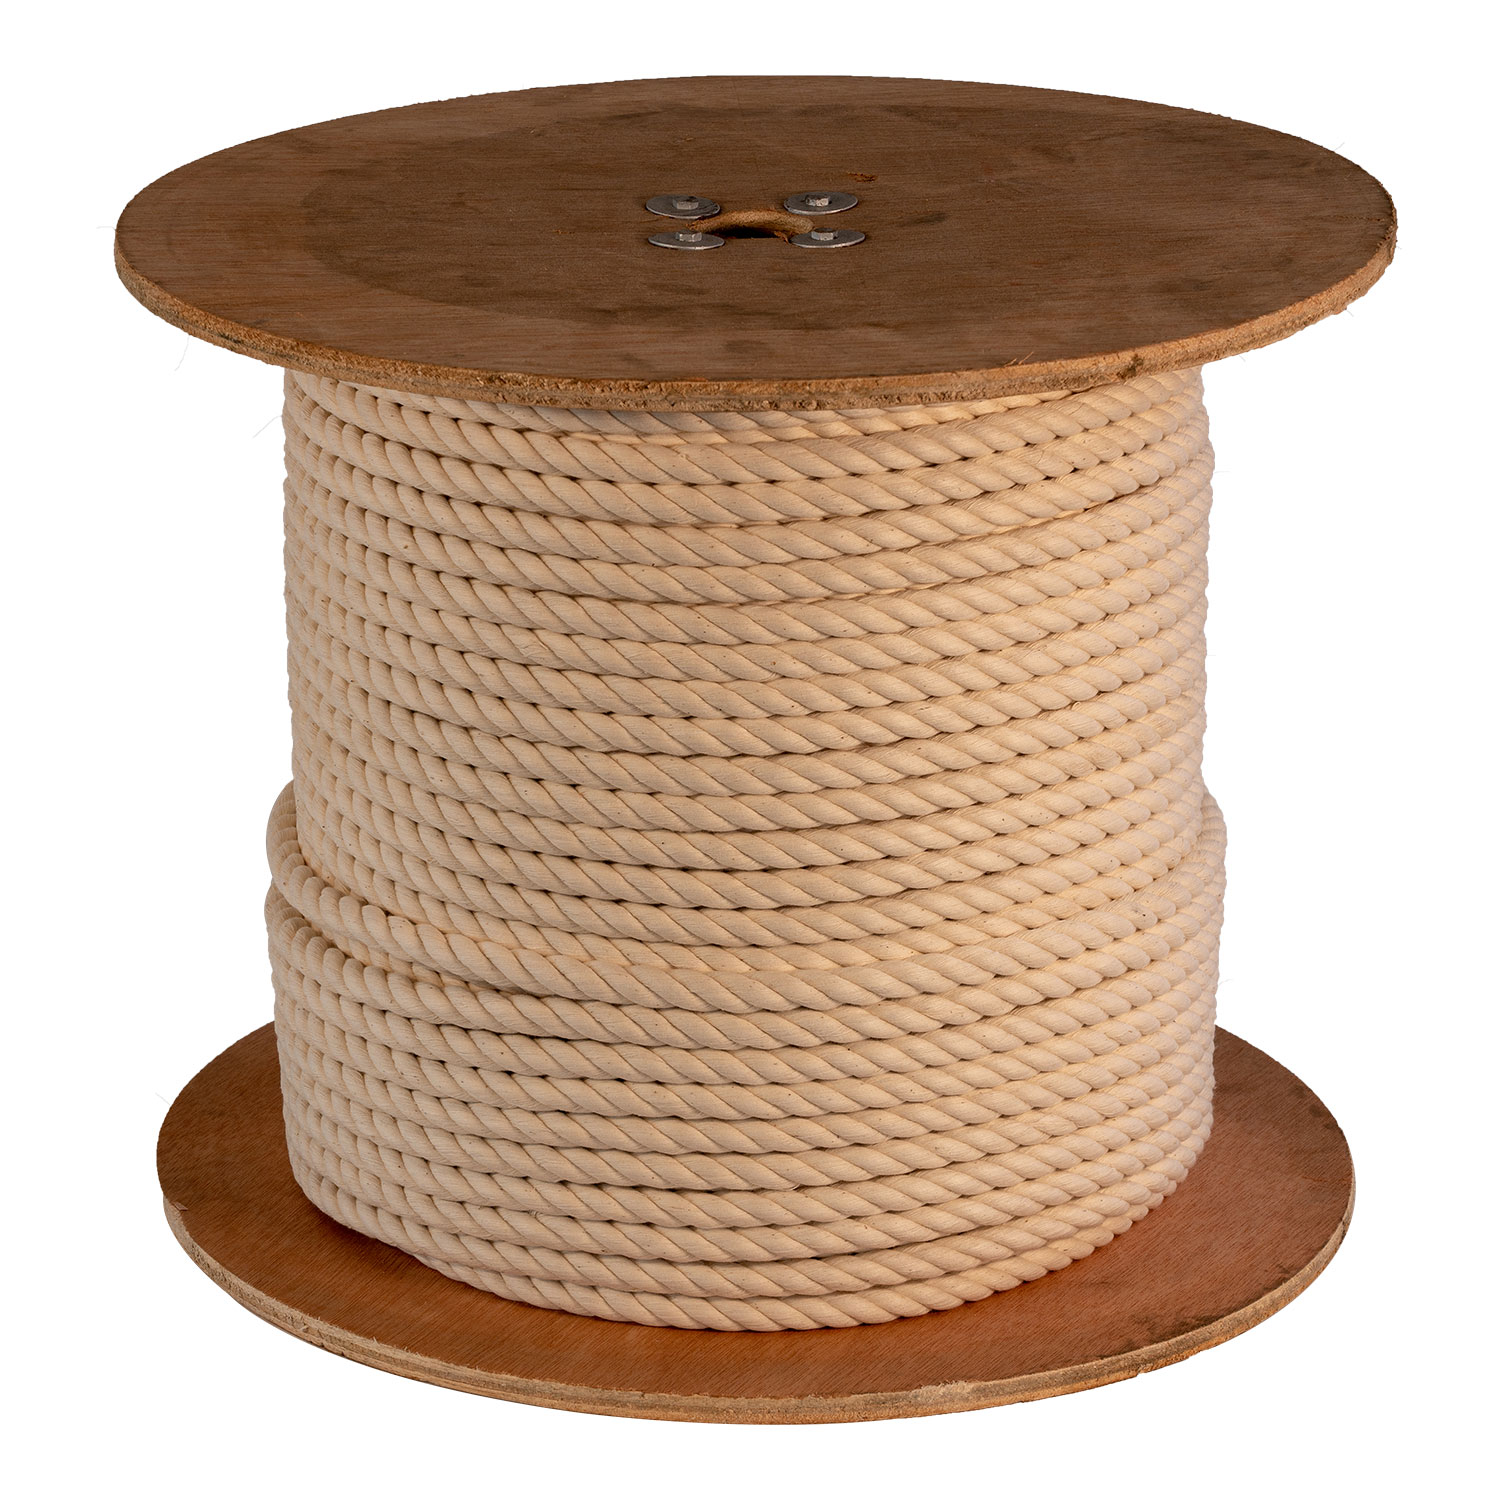 Twisted Poly-Dacron Combination Ropes